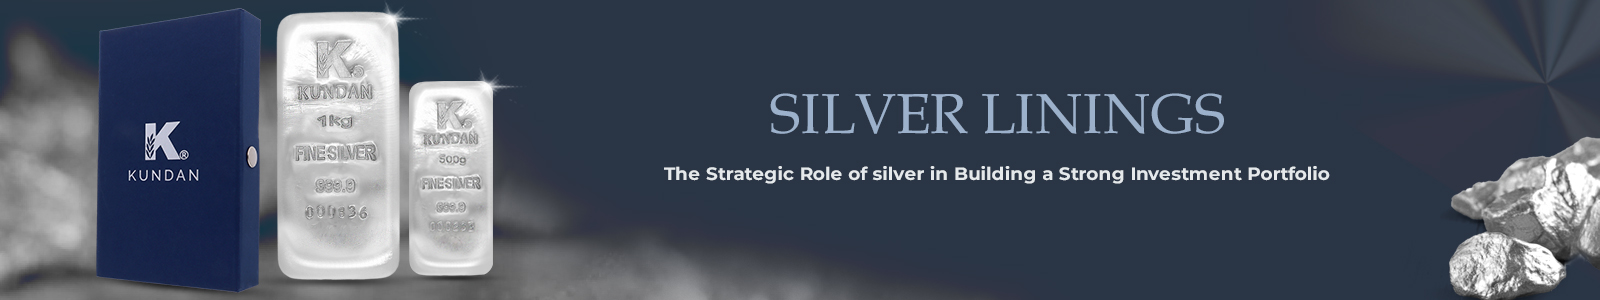 Silver Linings: The Strategic Role of silver in Building a Strong Investment Portfolio